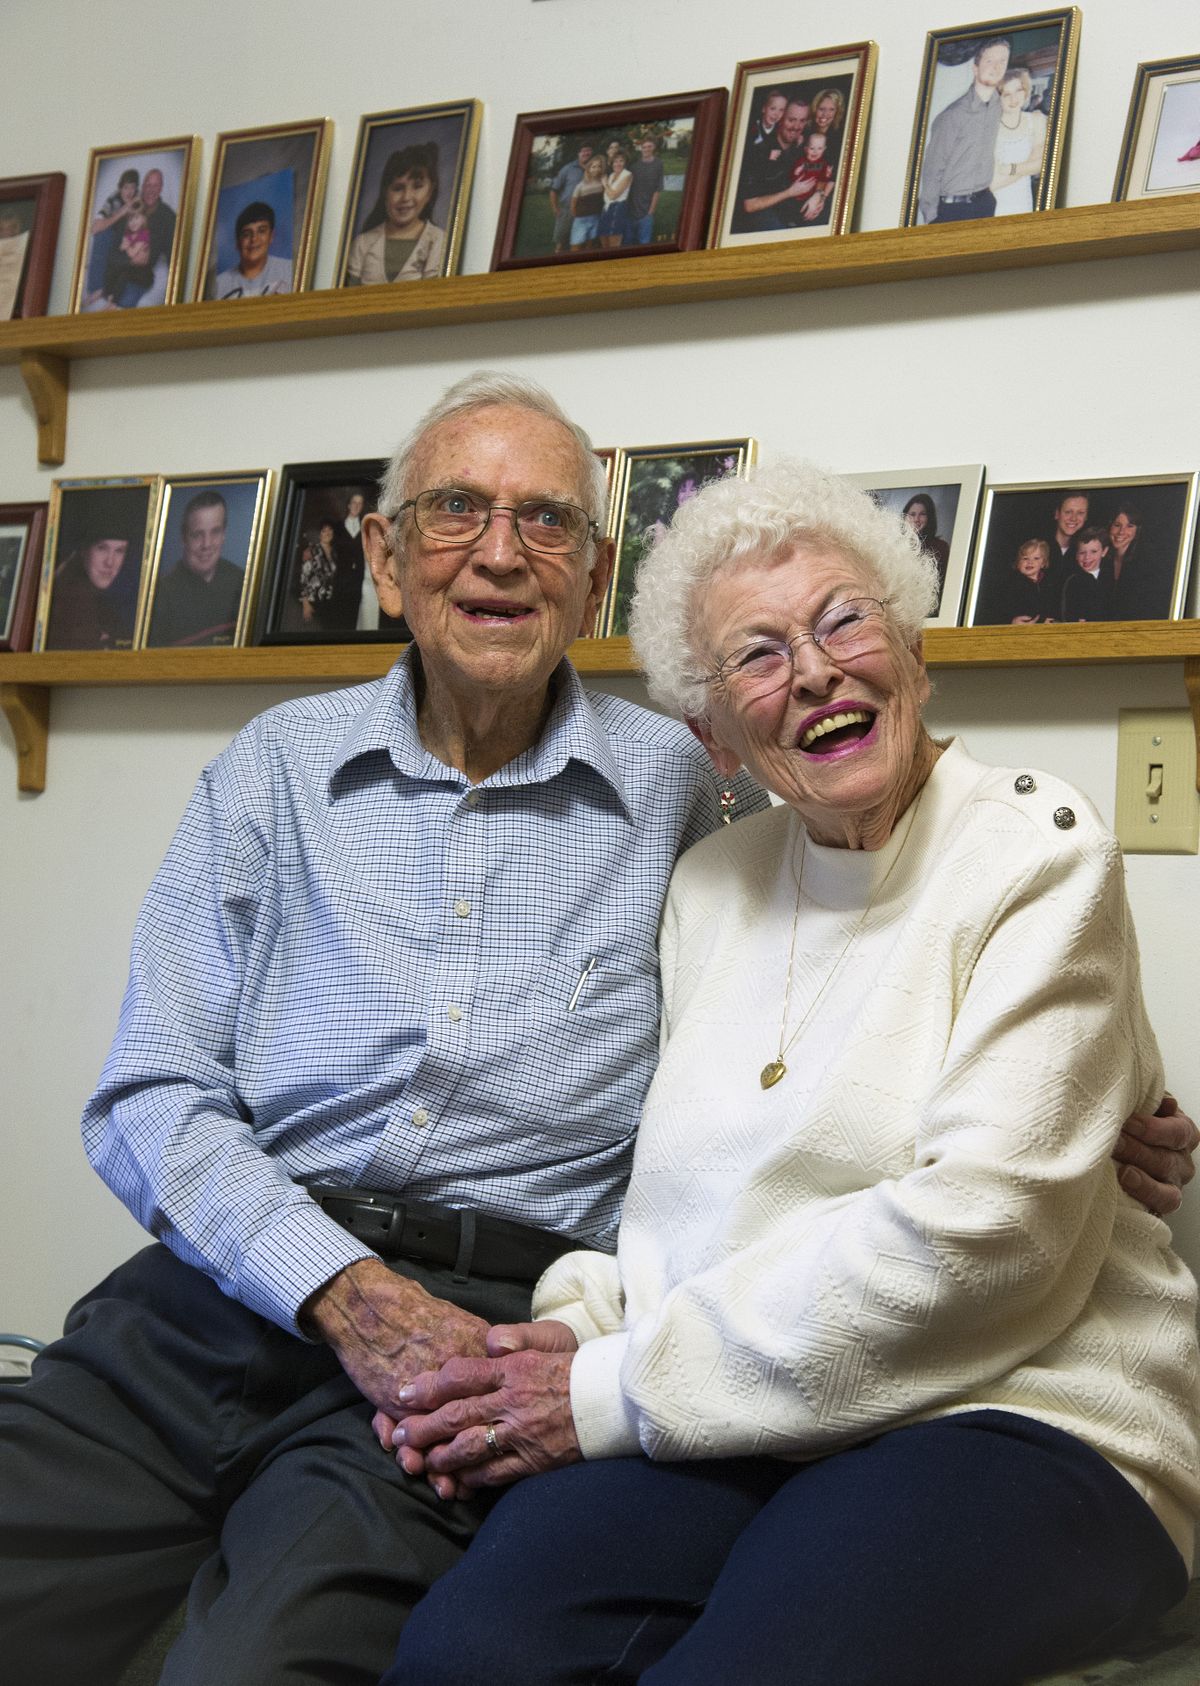 Lonnie and Peg Roe, of Spokane Valley, will be celebrating their 70th wedding anniversary on Dec. 21. (Colin Mulvany)